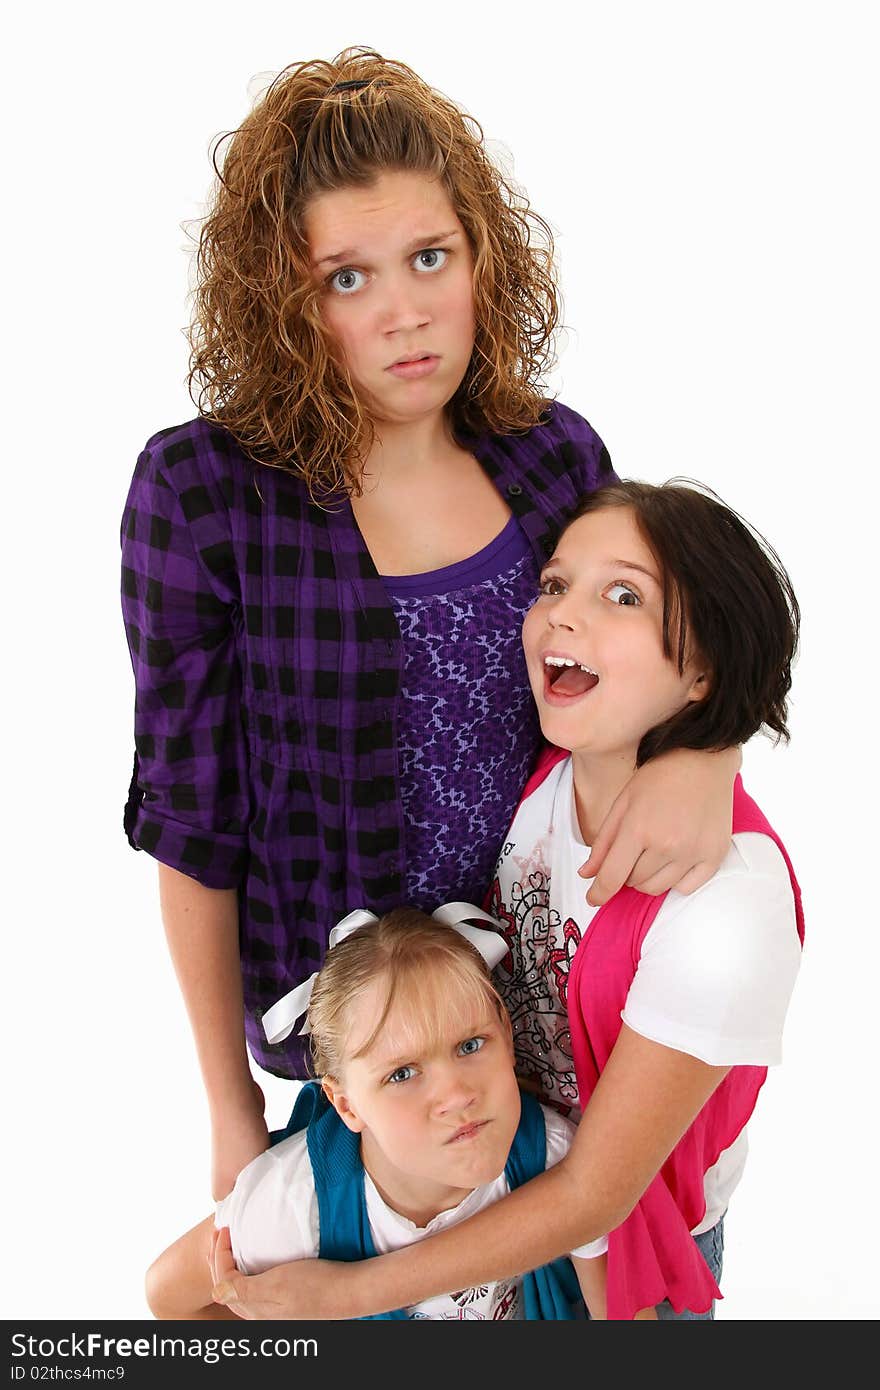 Adorable american sisters making silly faces over white background. Adorable american sisters making silly faces over white background.